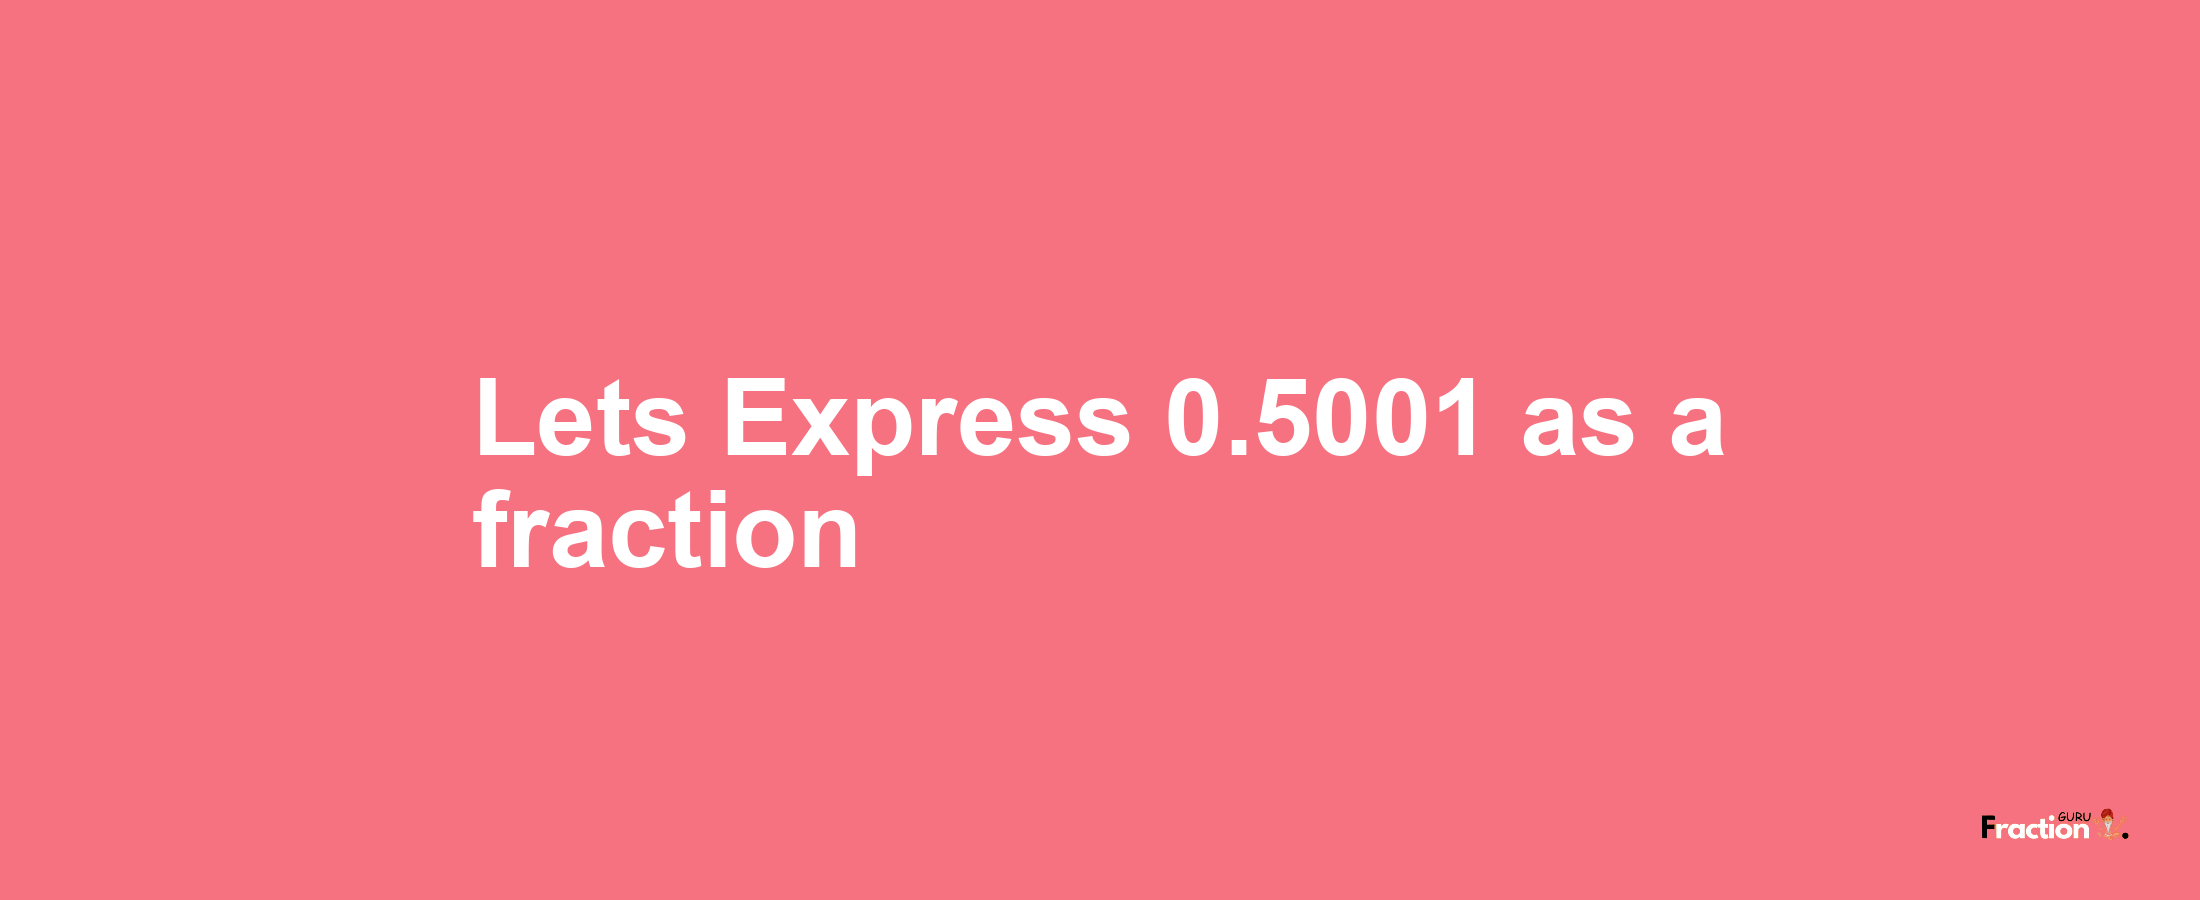 Lets Express 0.5001 as afraction